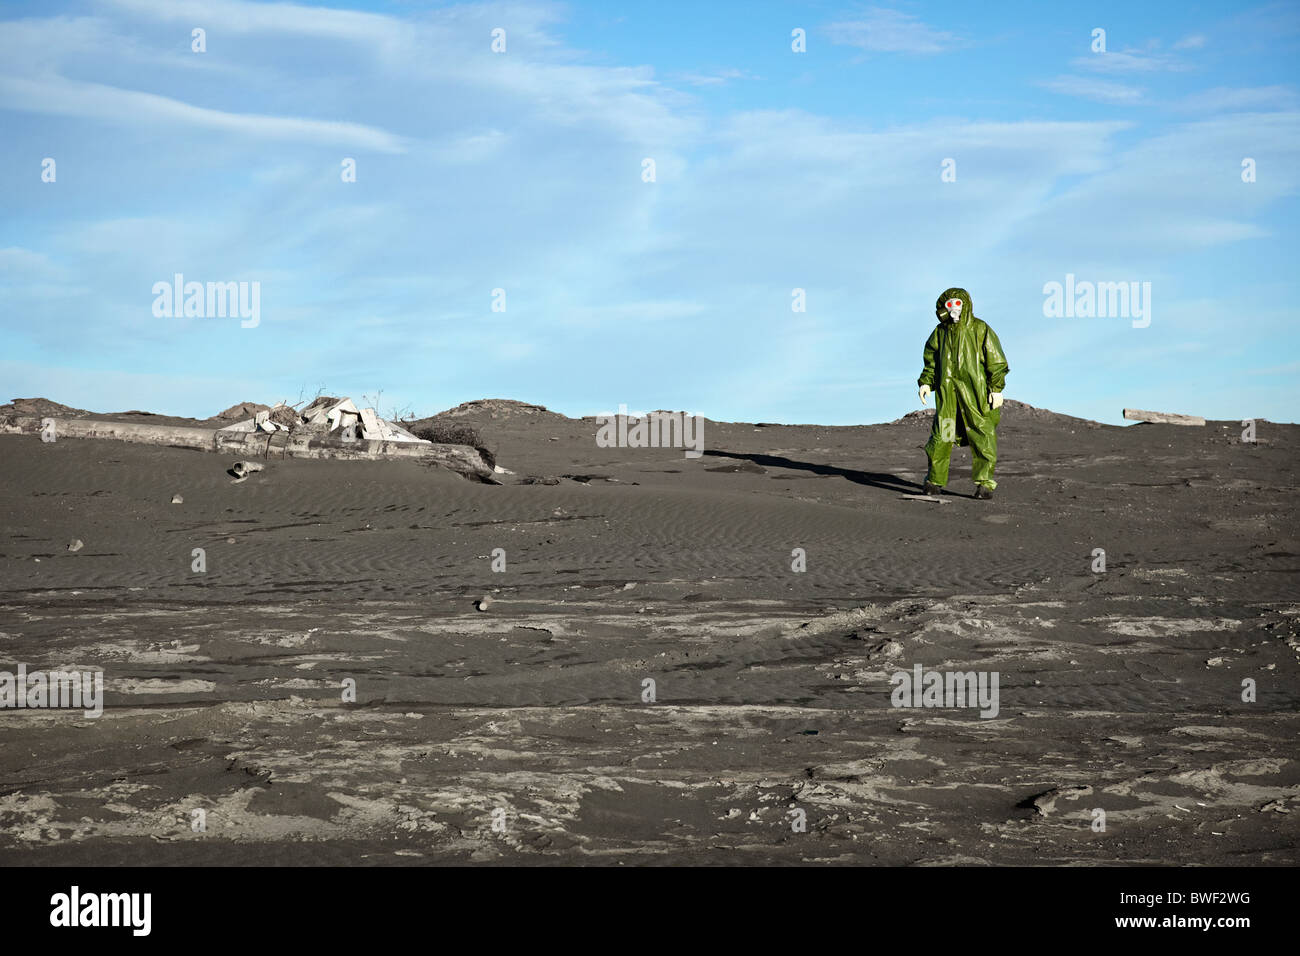 A man in overalls like an alien in the desert Stock Photo